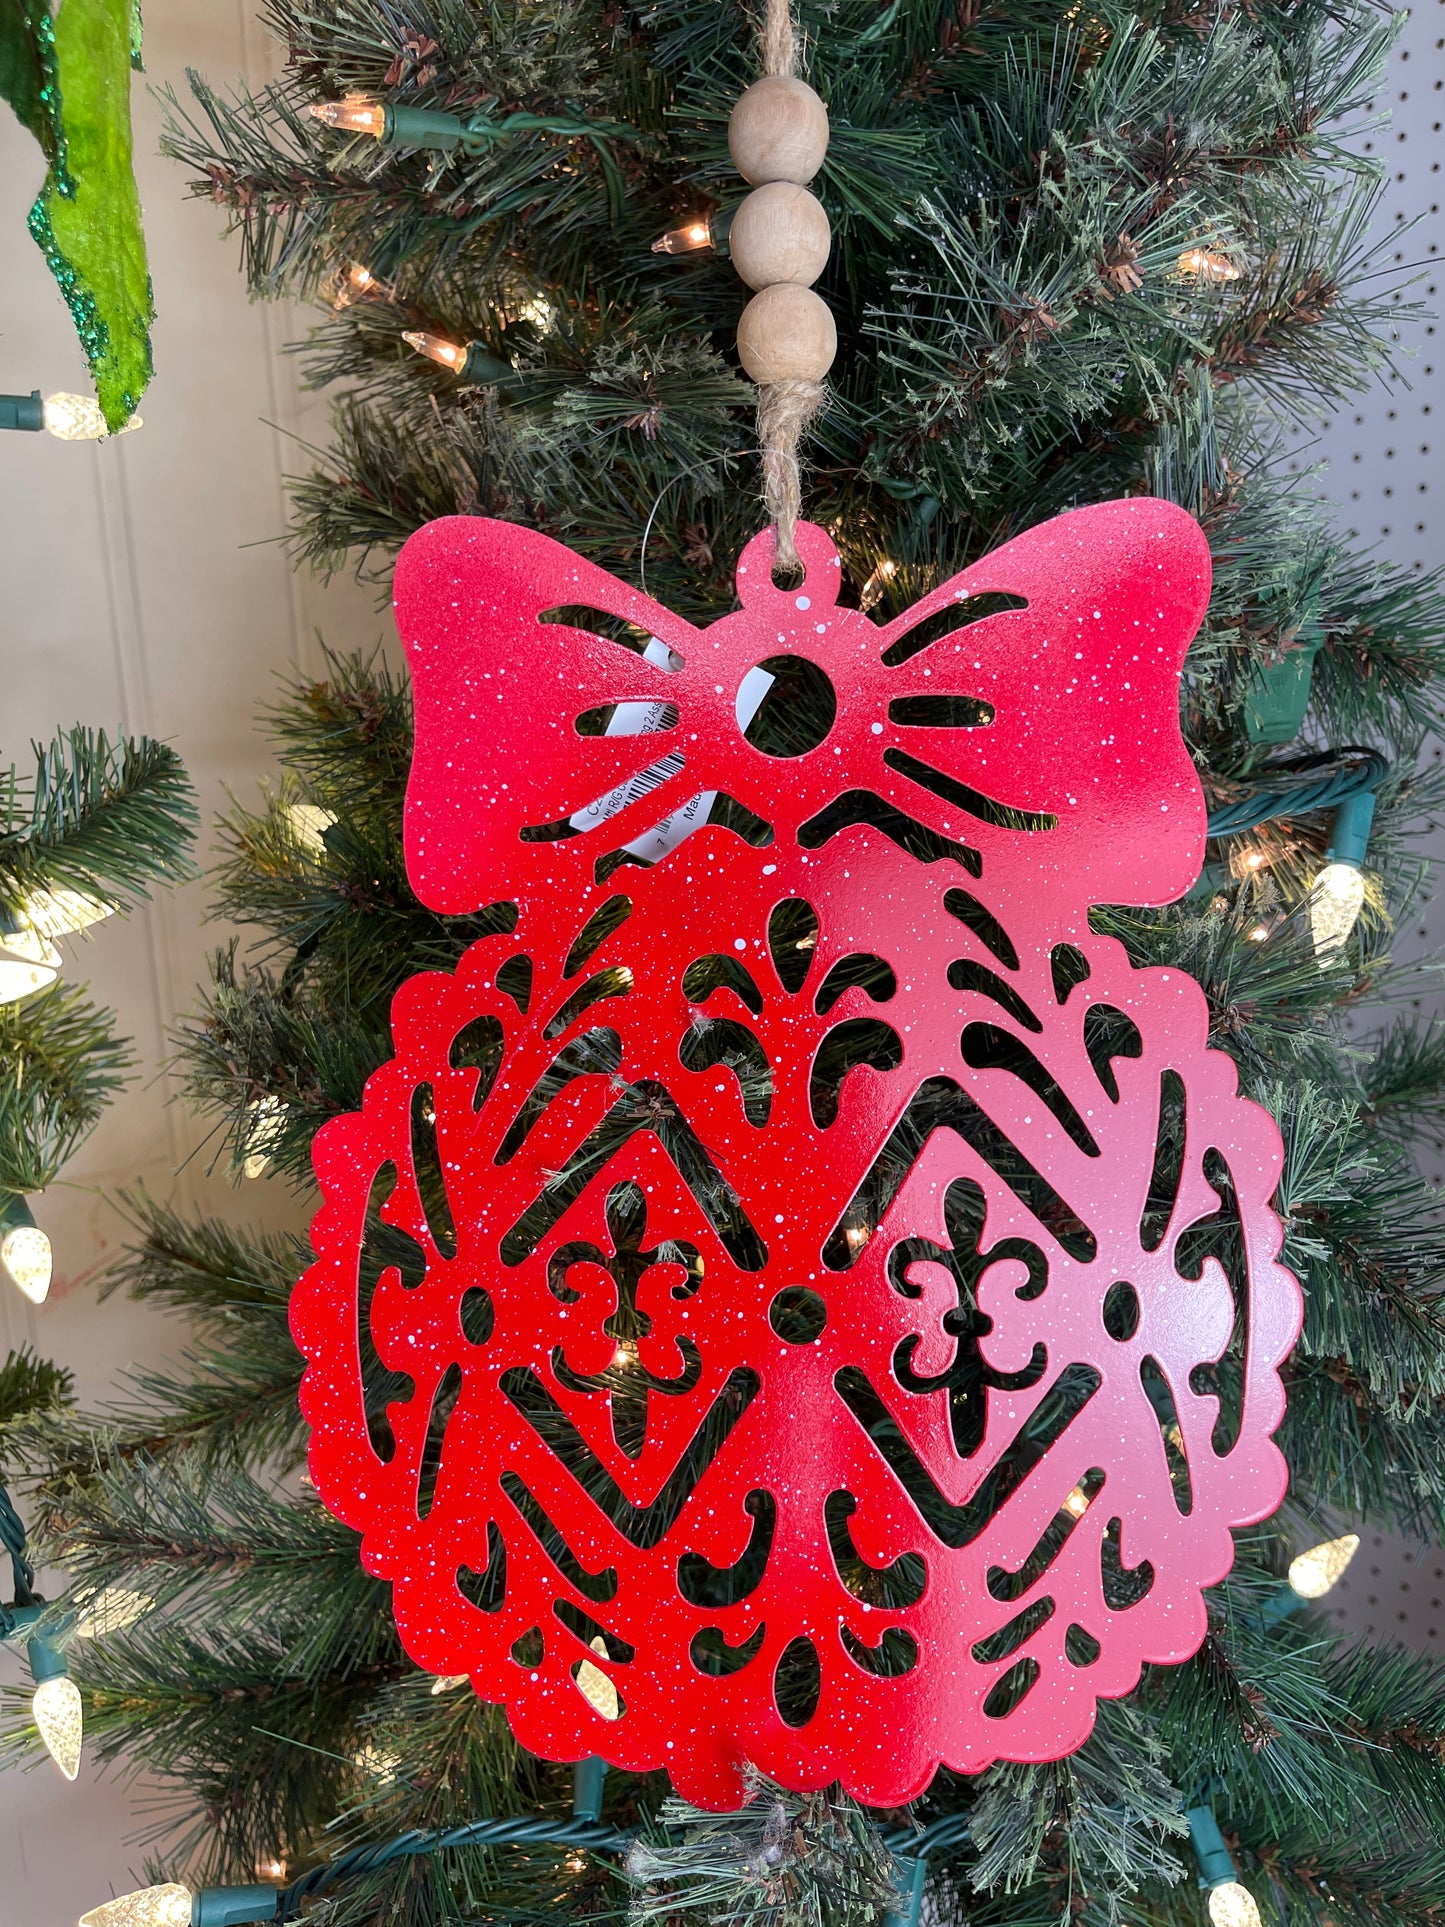 Red And Green Metal Cutout Christmas Ornament - 2 Styles